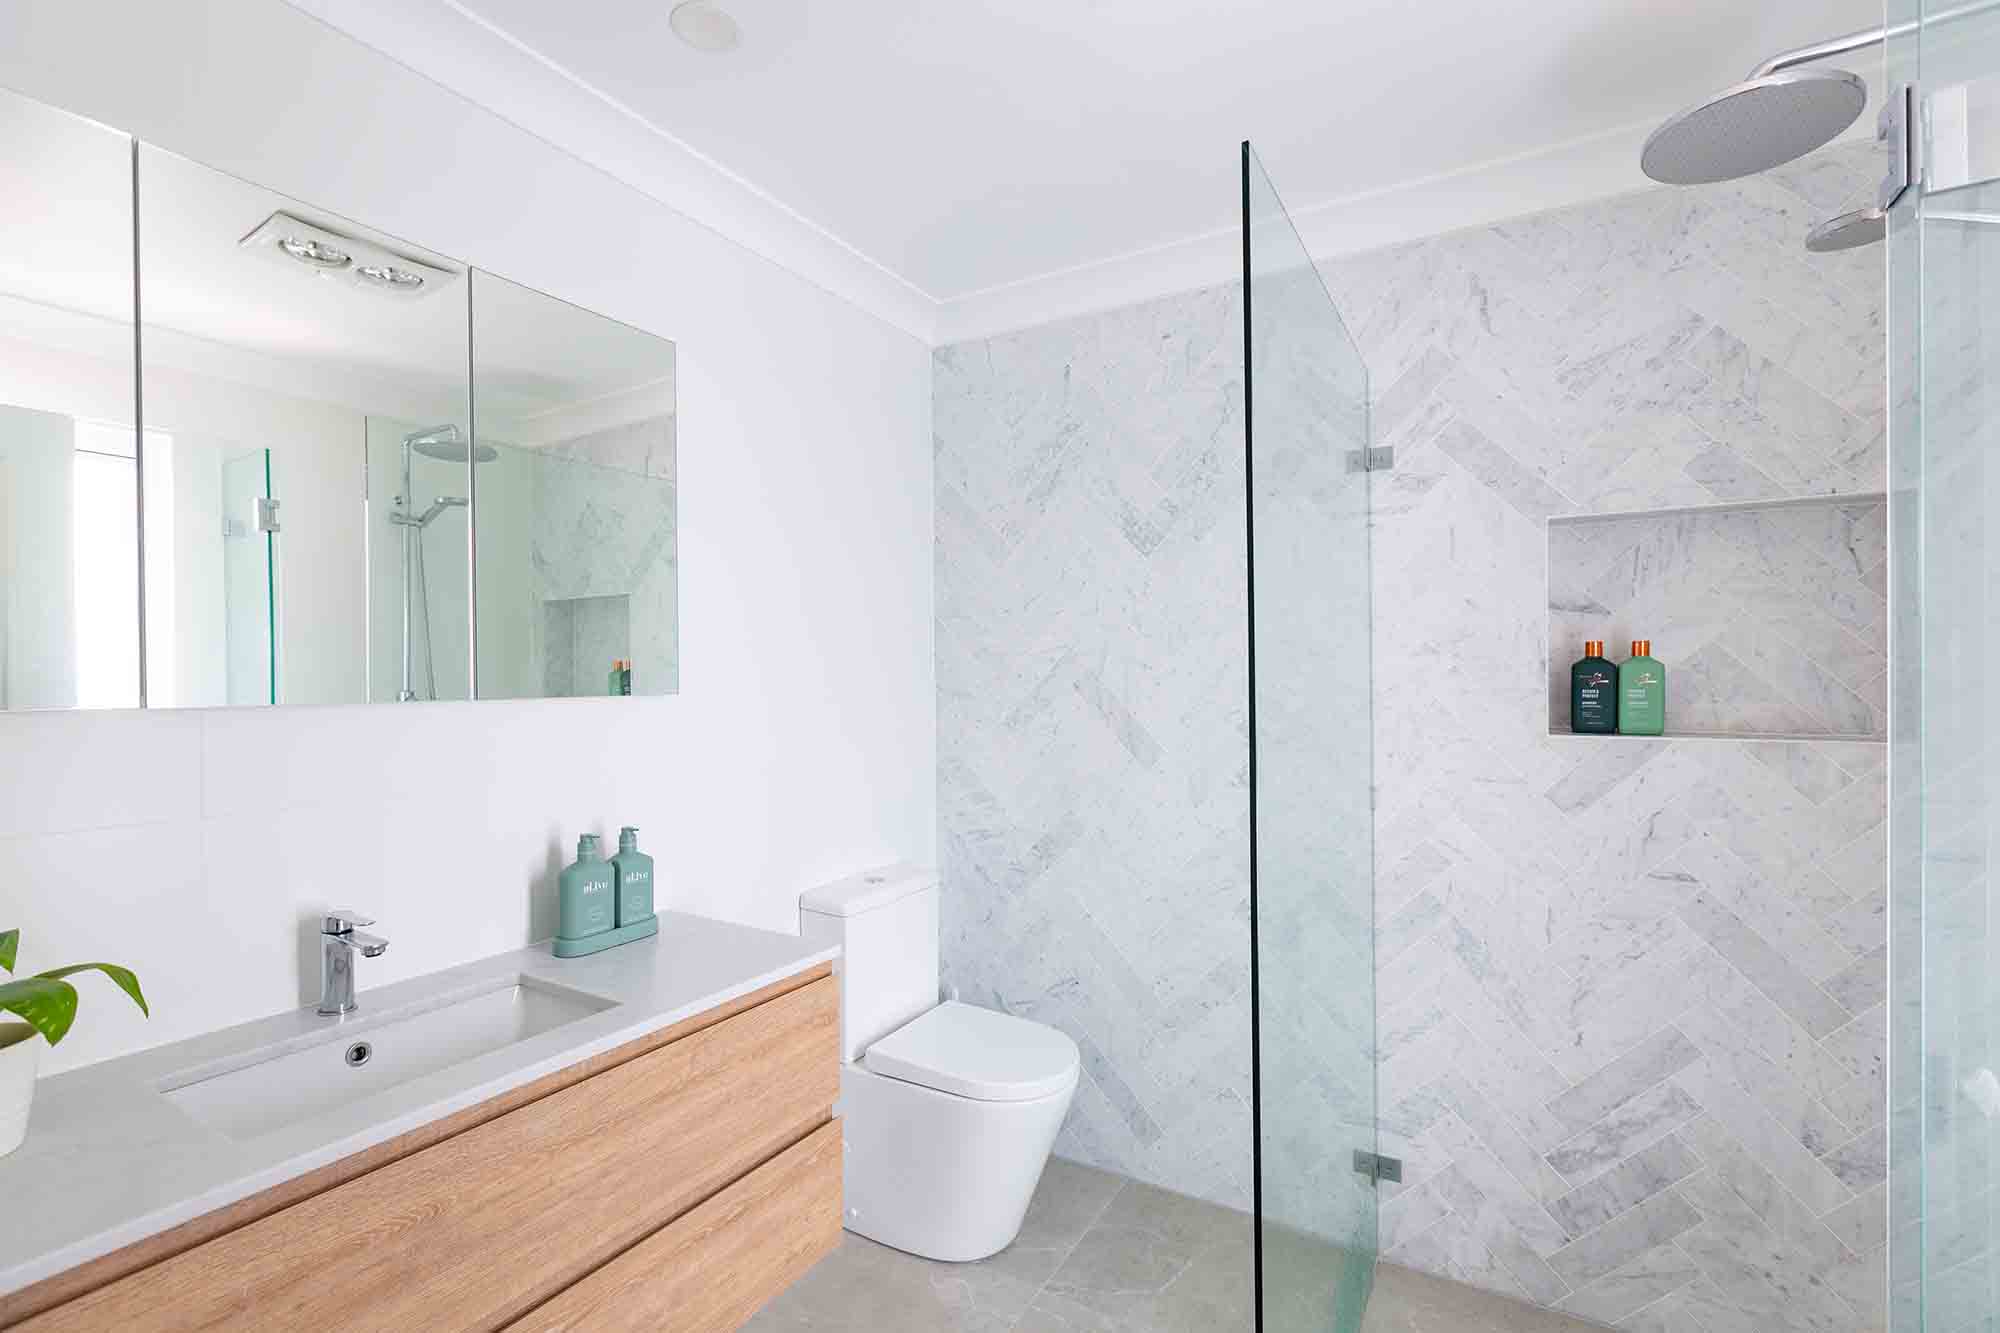 How to Prioritize Your Spending During a Bathroom Remodel